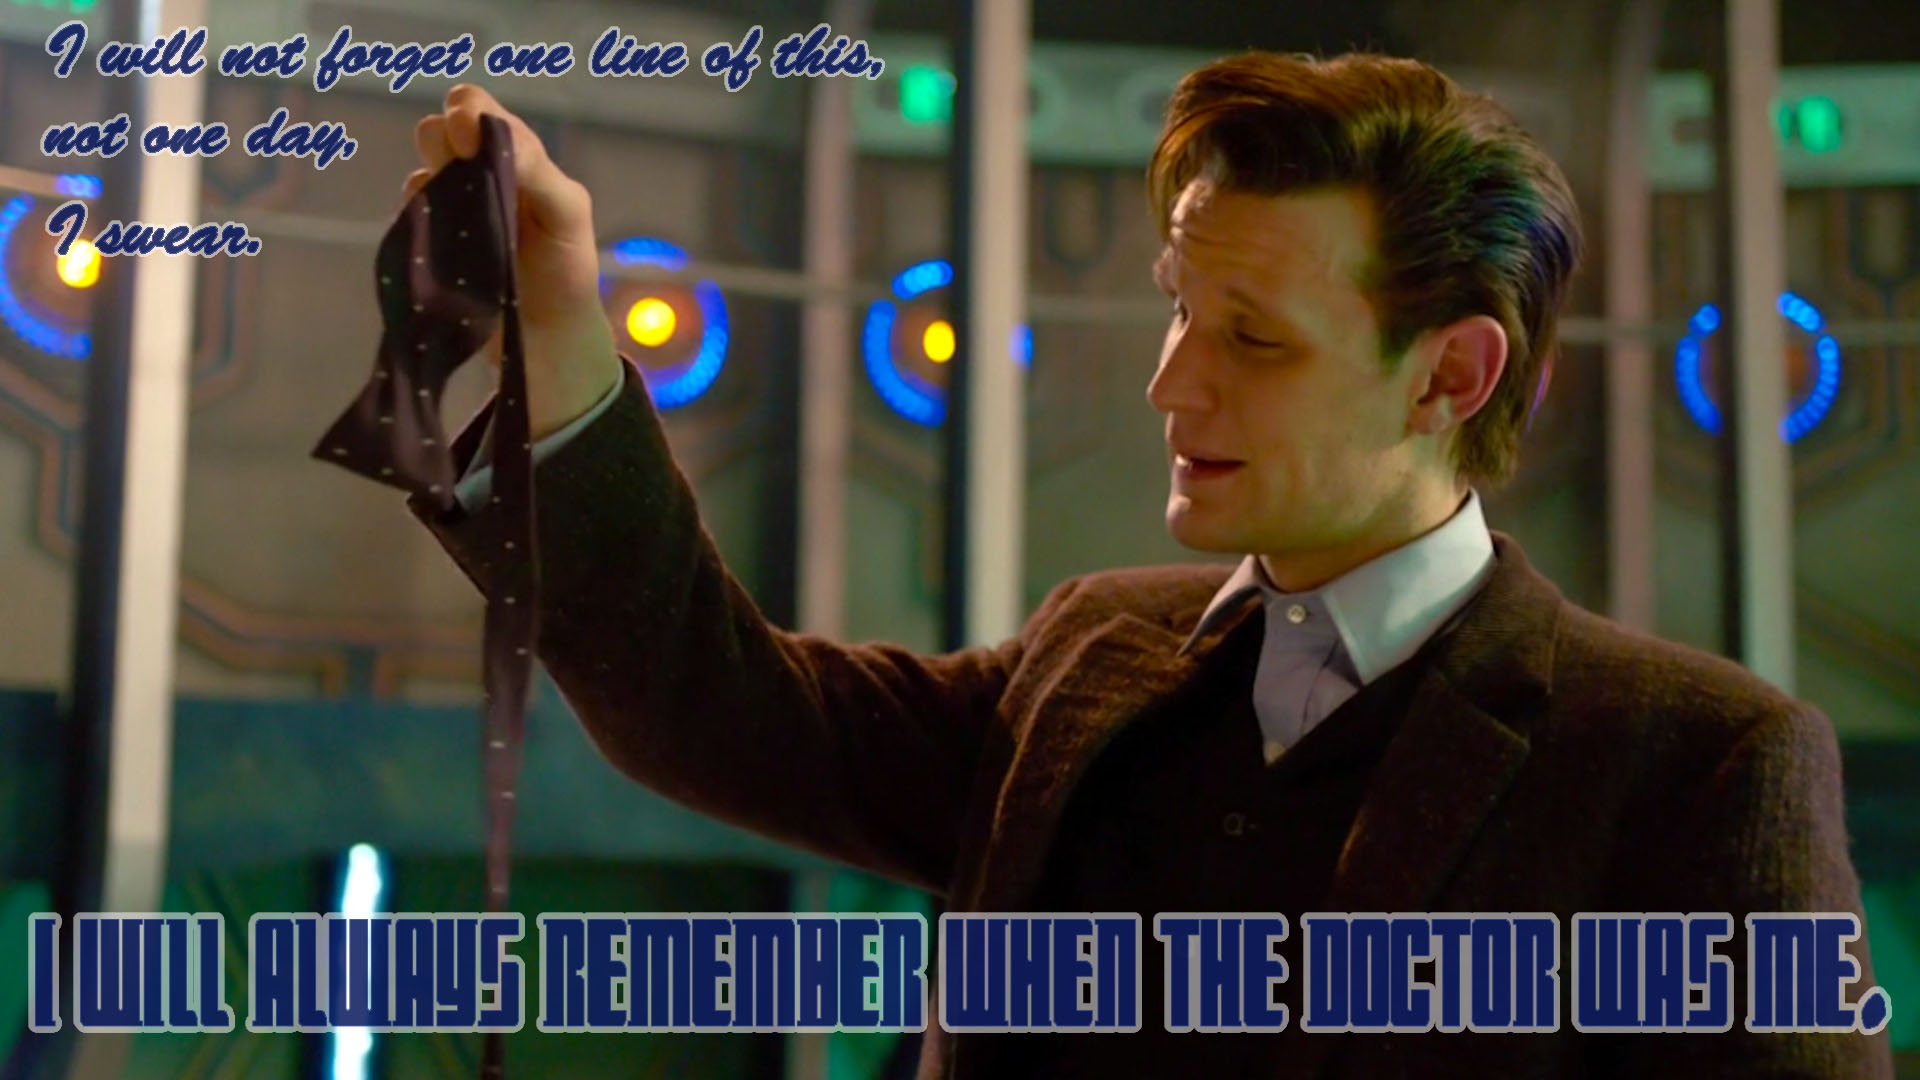 Doctor Who Wallpaper Of Matt Smith With Show Quote